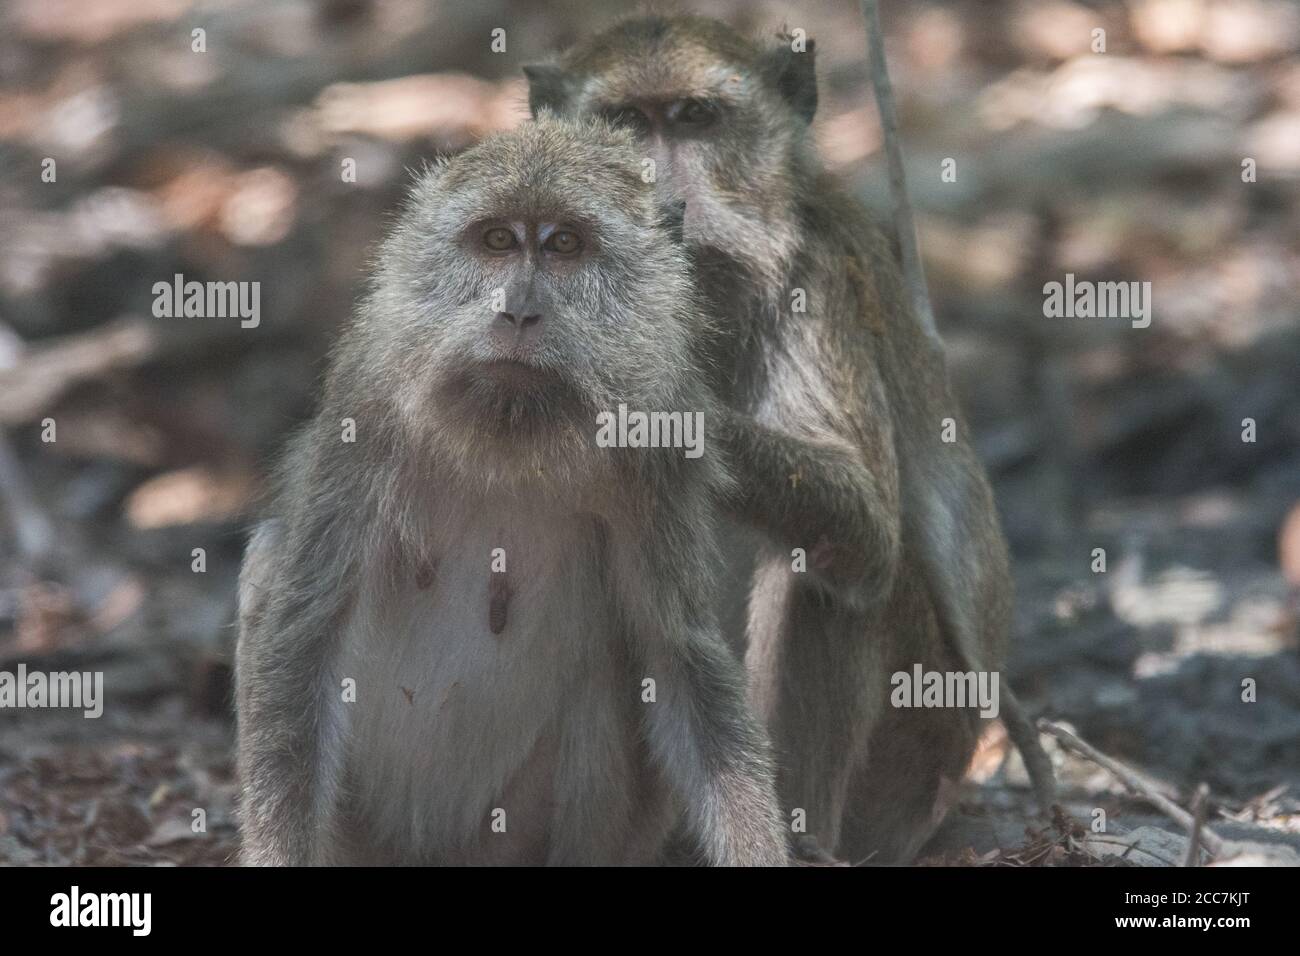 A pair of crab eating macaques (Macaca fascicularis) in Komodo National Park, one grooms the other. A common example of social behavior in monkeys. Stock Photo